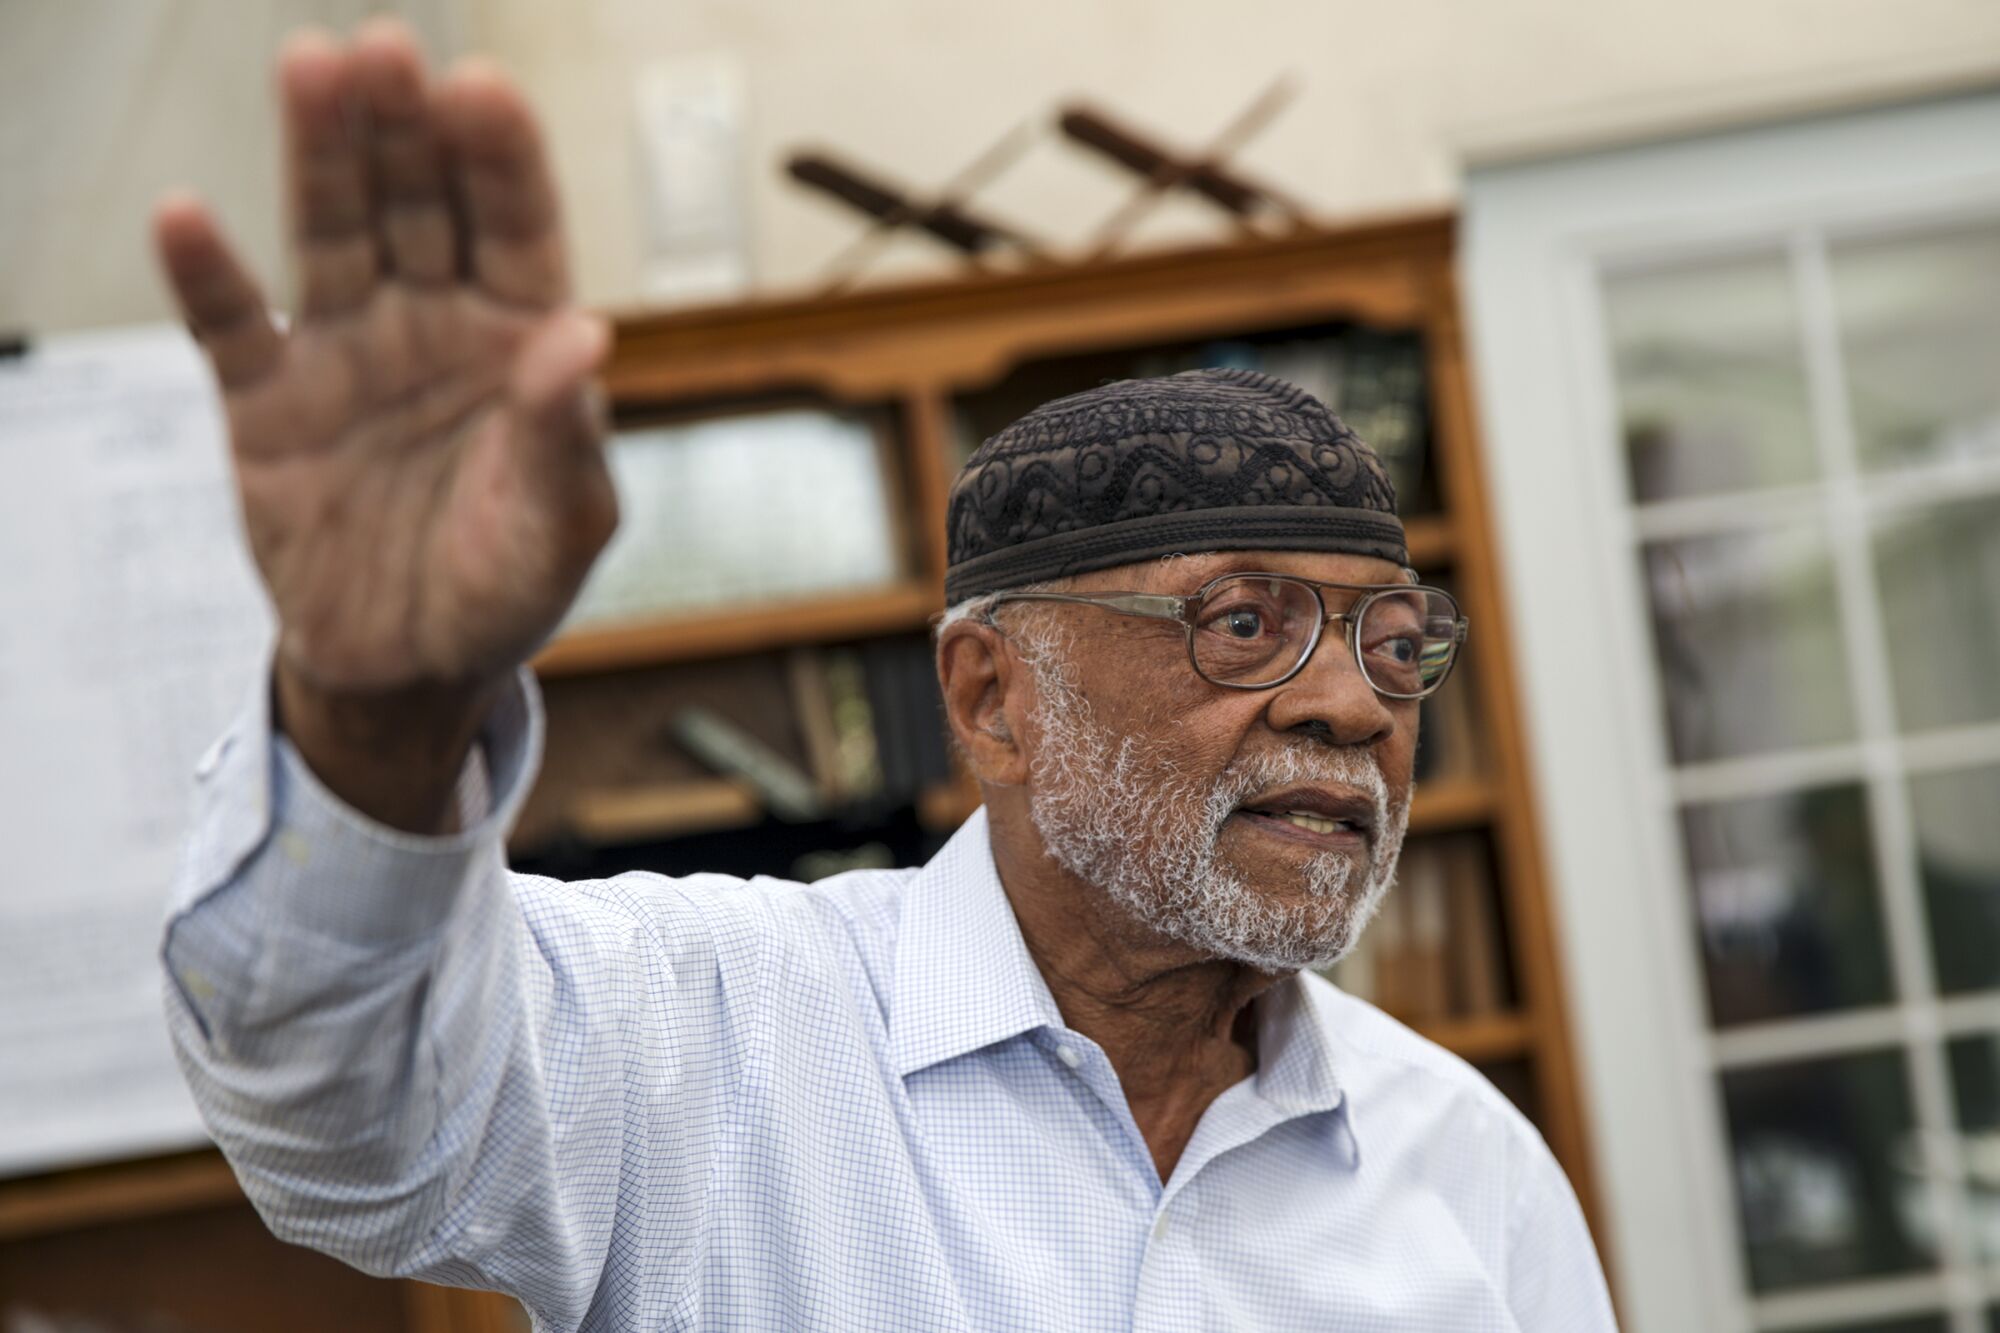 An older man wearing a cap and glasses with his hand raised